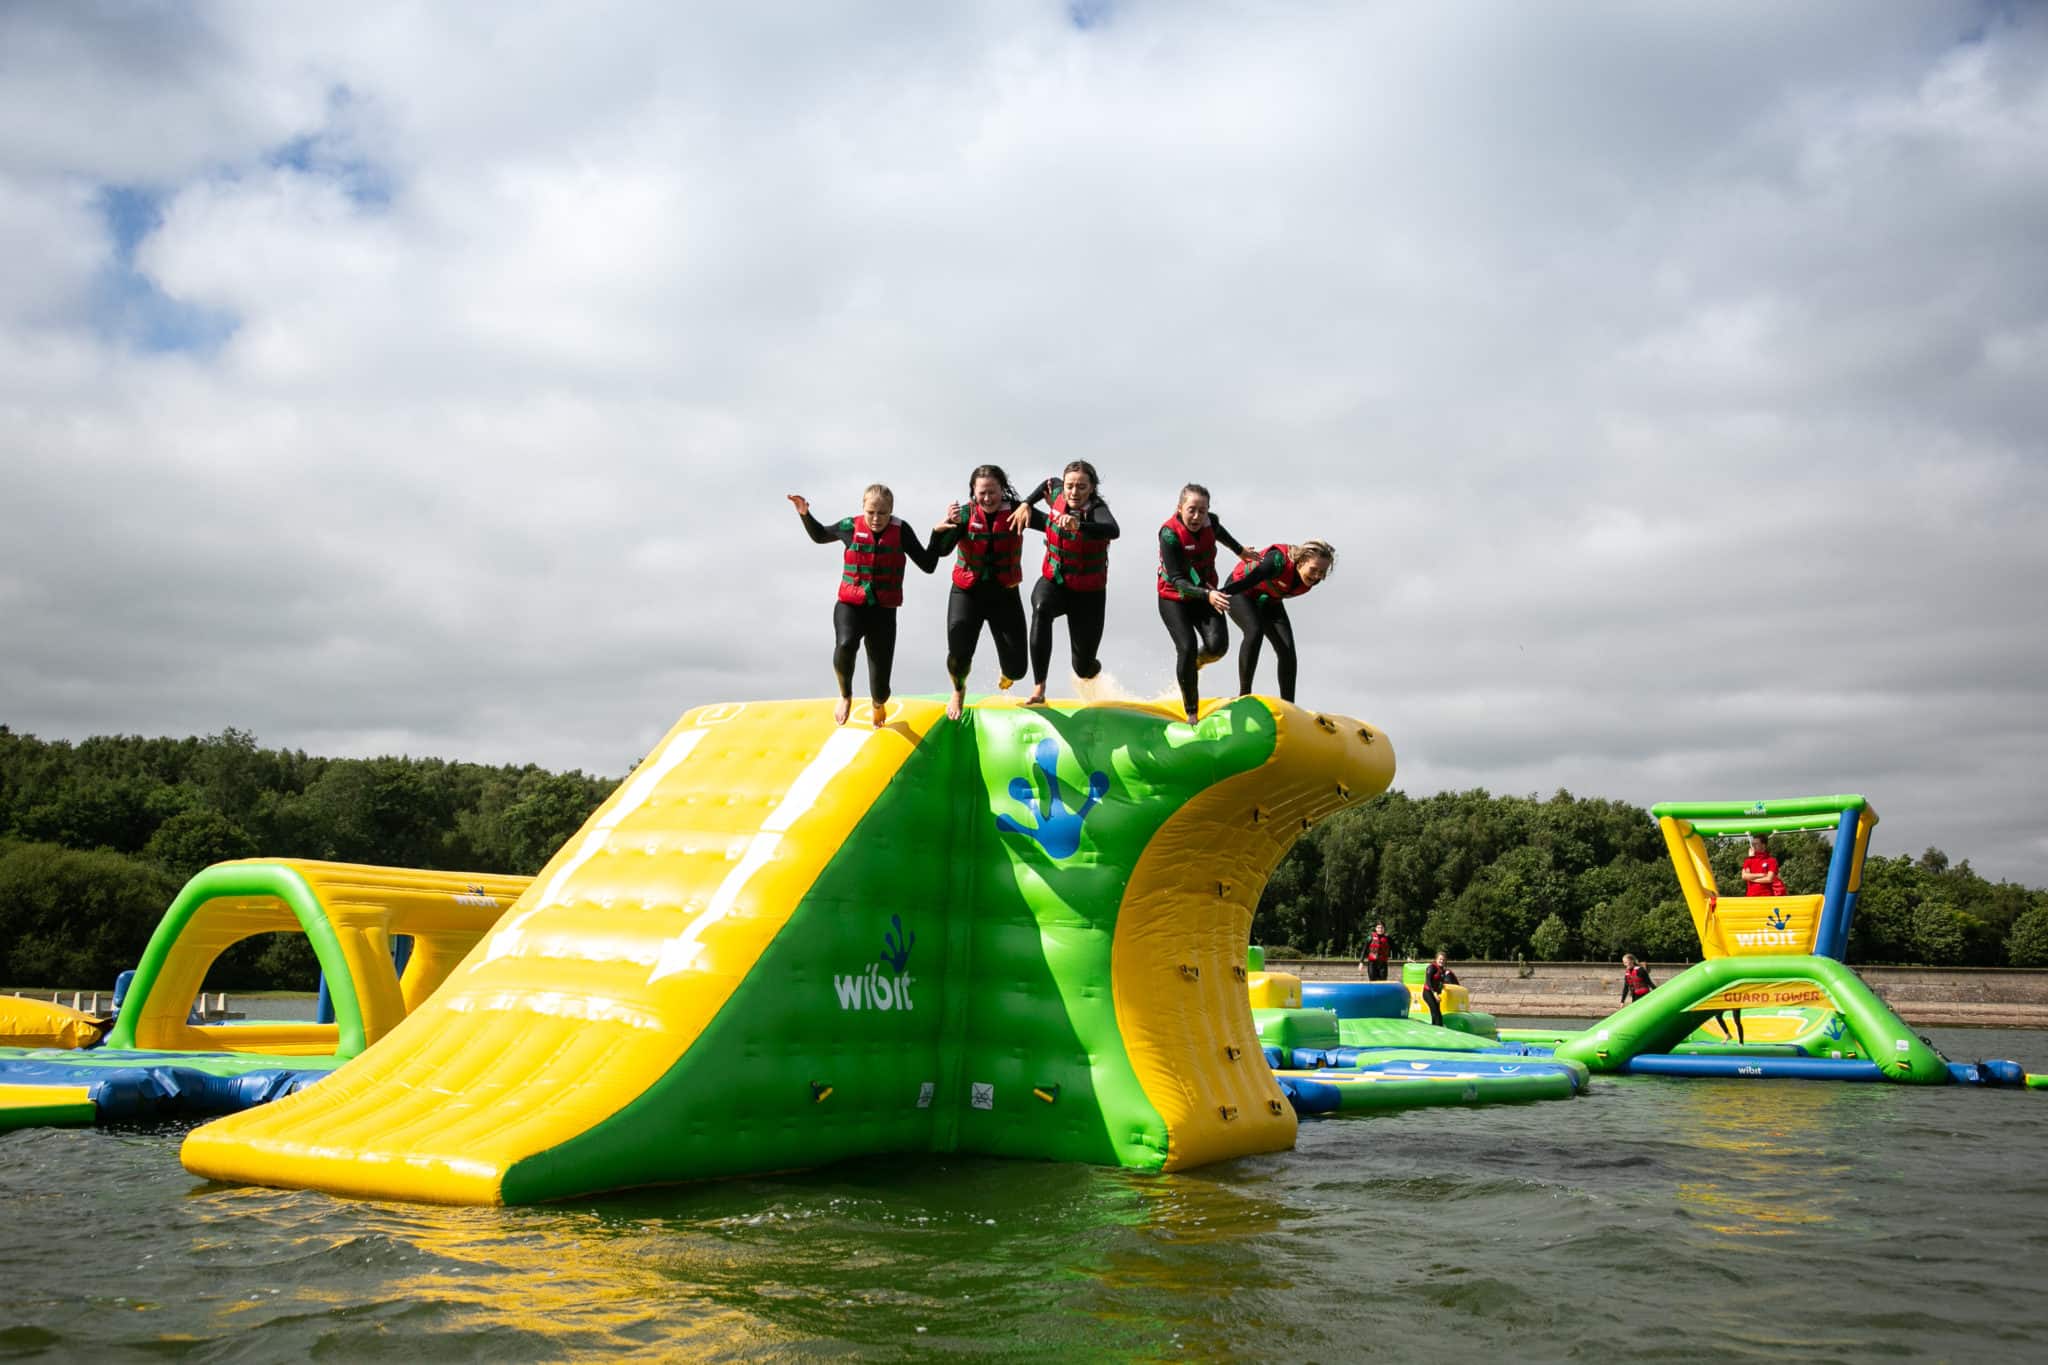 5 people jumping from wibit inflatable